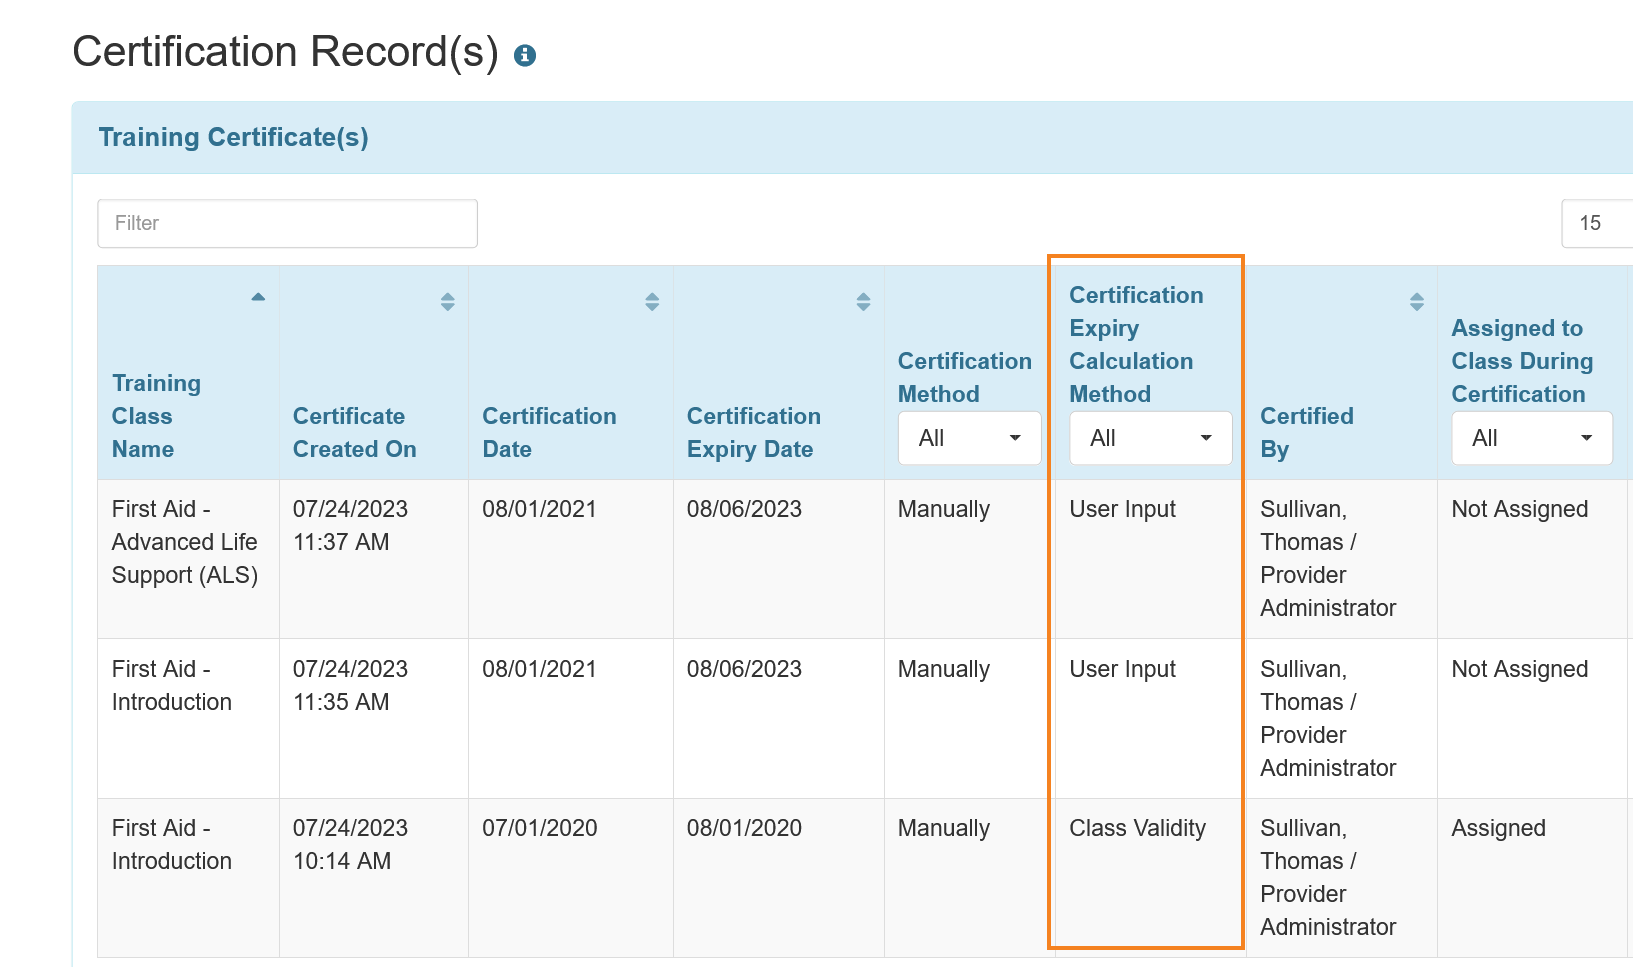 Screenshot of Certification Record(s) form.